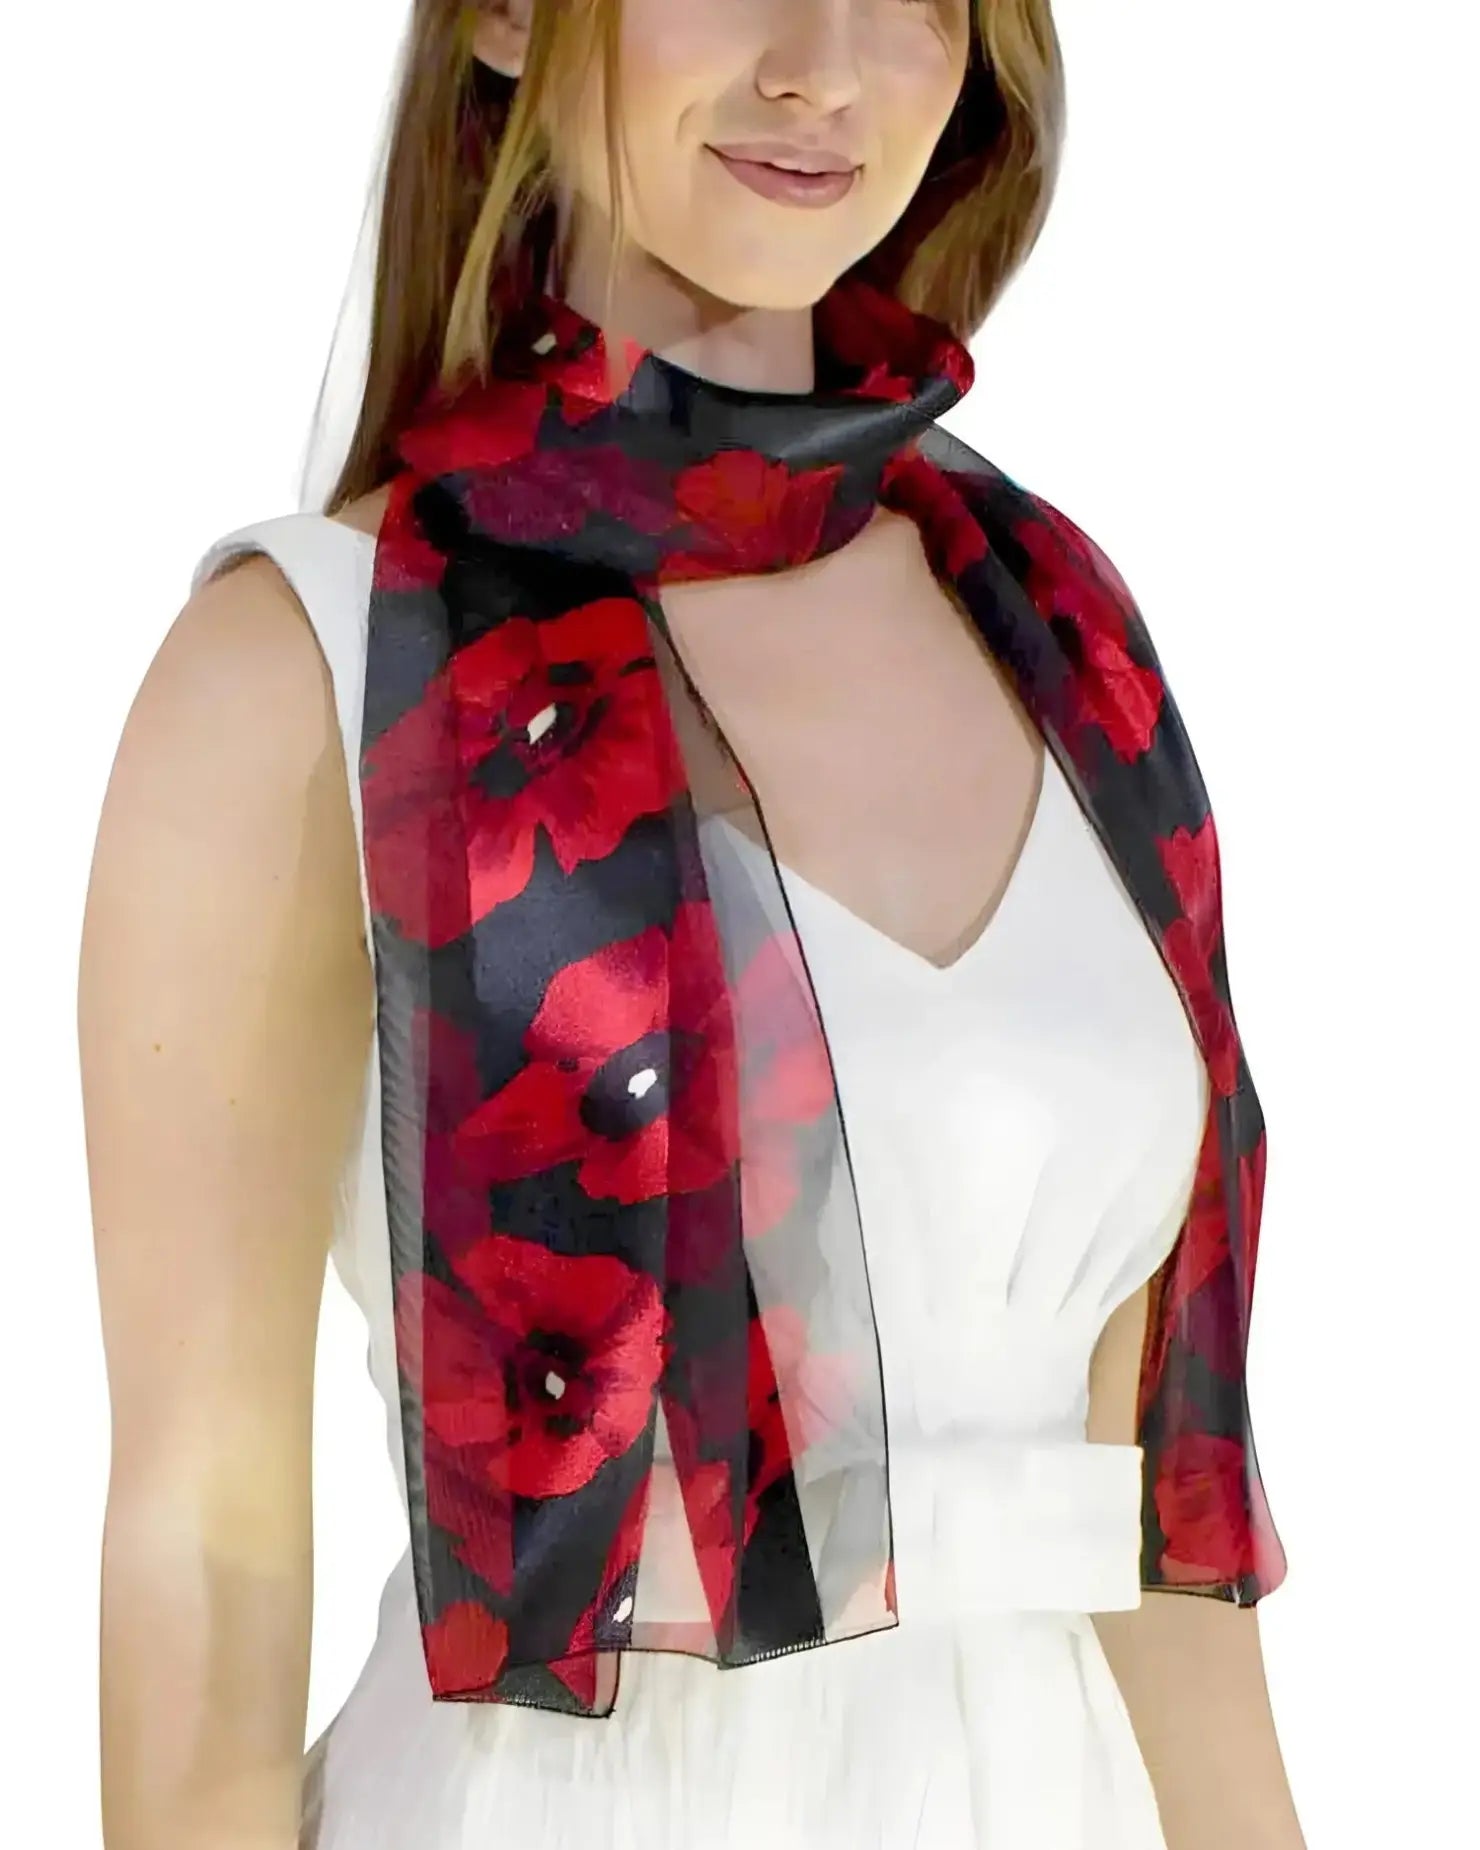 Woman wearing red and black poppy floral print scarf from Poppy Floral Print Scarf & Gold Plated Ring Set.